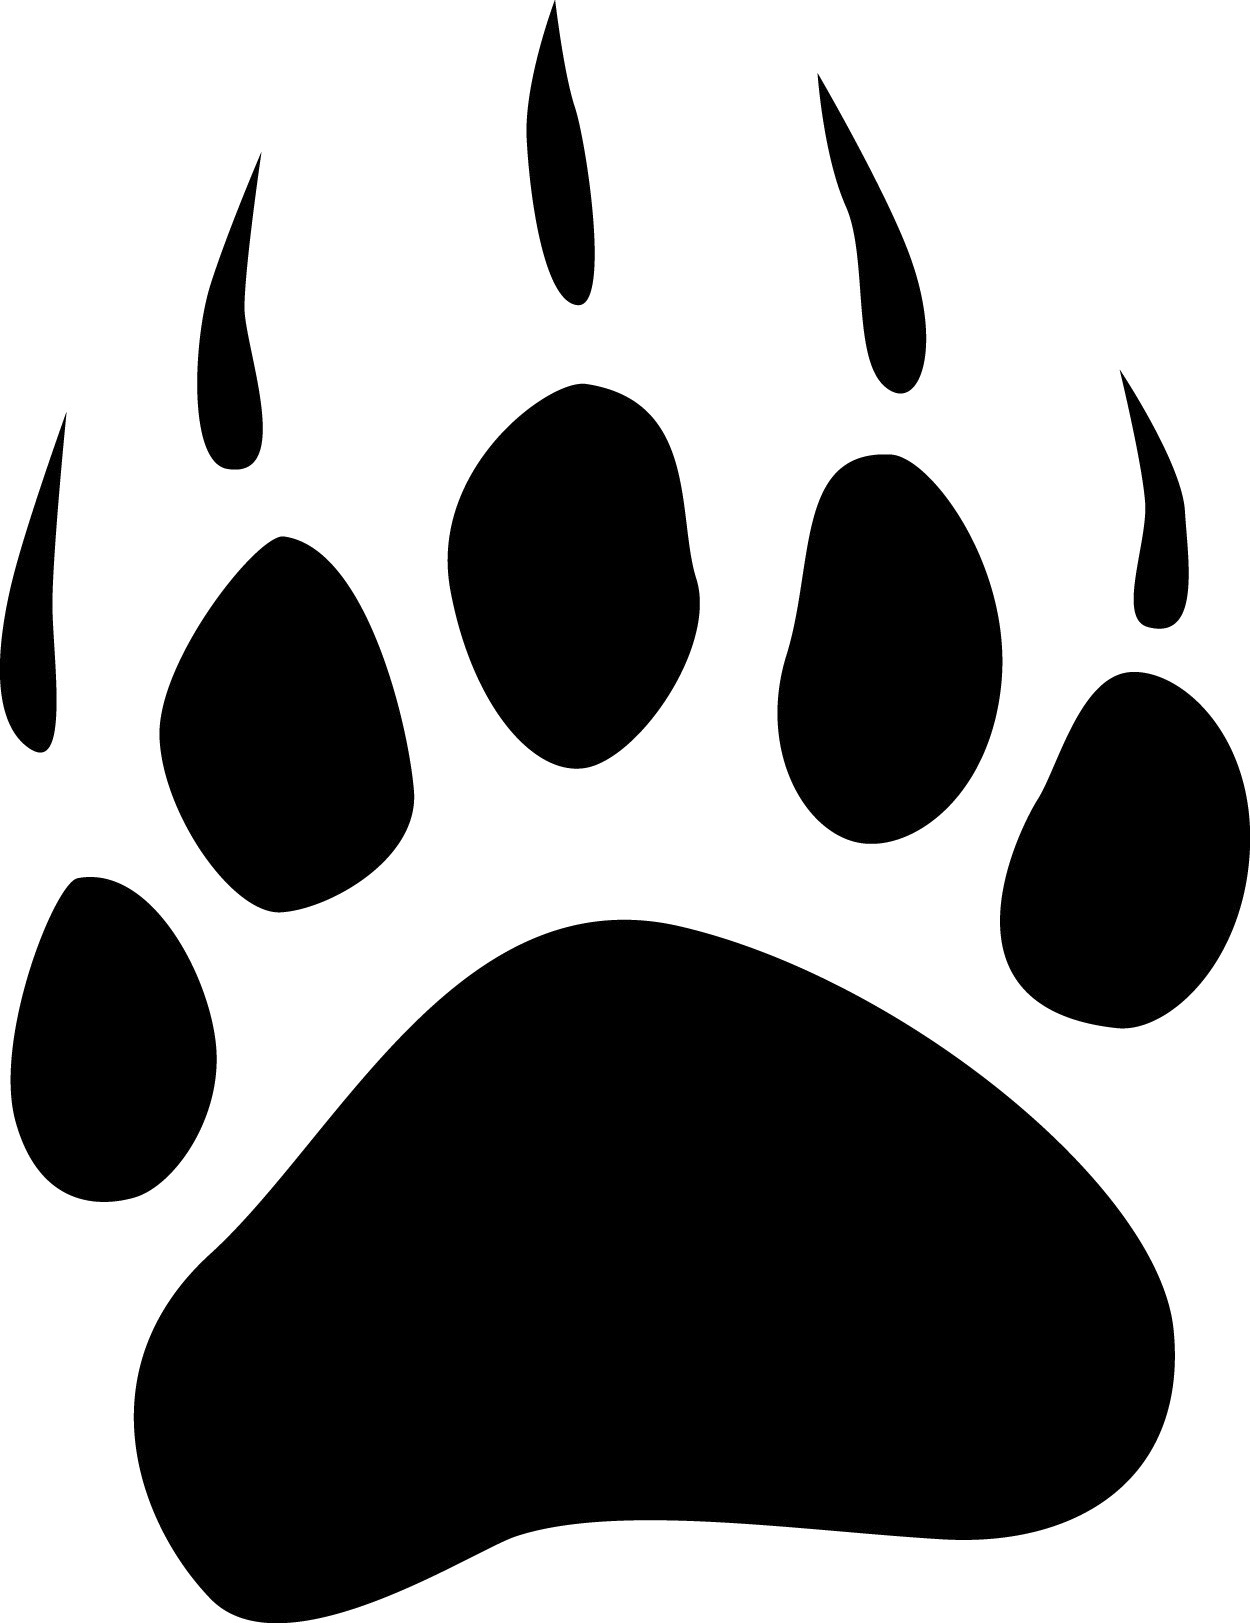 Animal Paw Prints Pictures